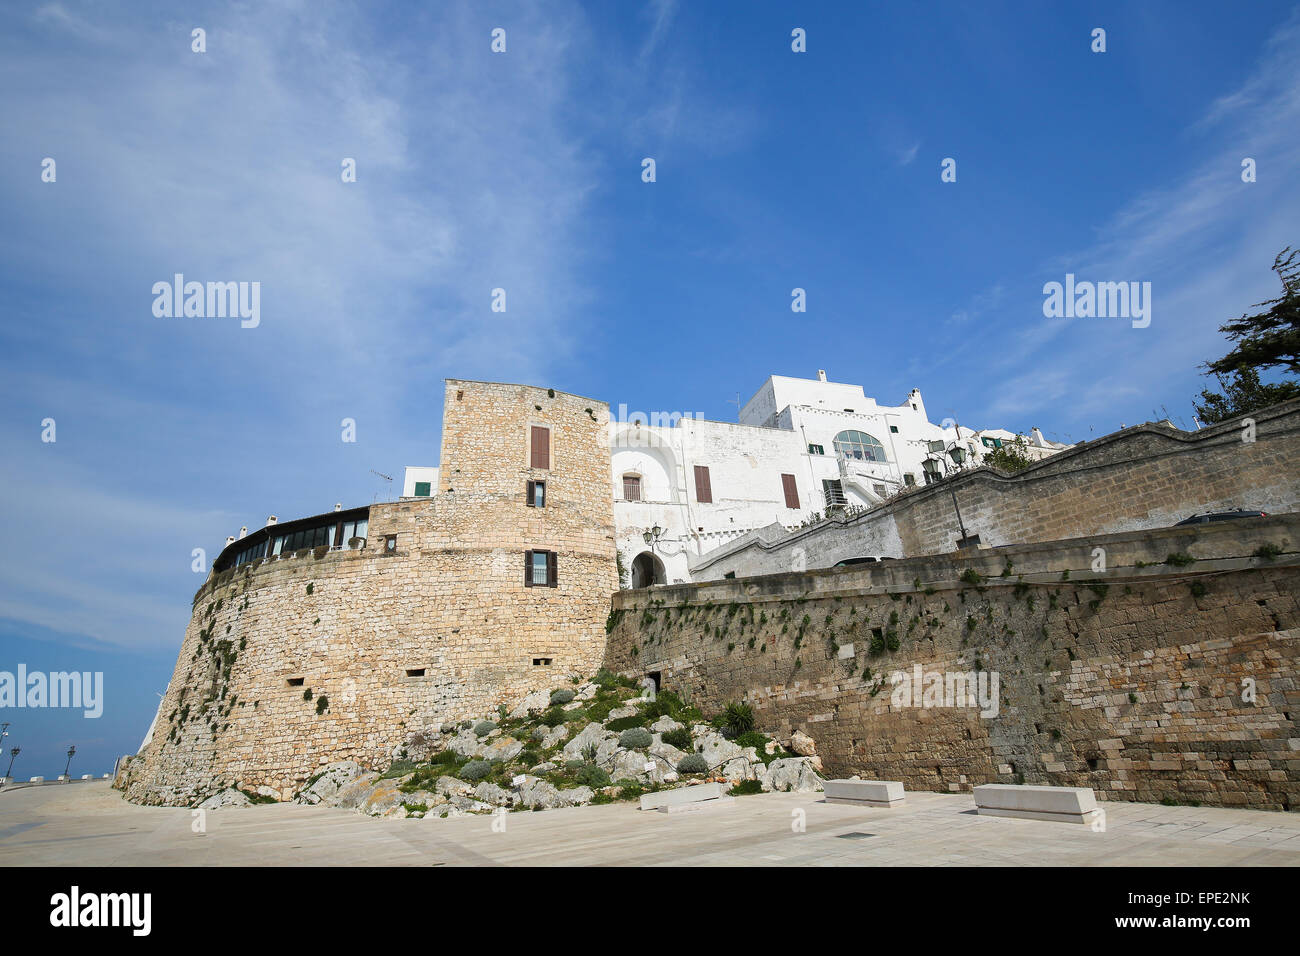 City Walls of the medieval town Ostuni in Puglia, South Italy, known as the White City or La Citta Bianca. Stock Photo